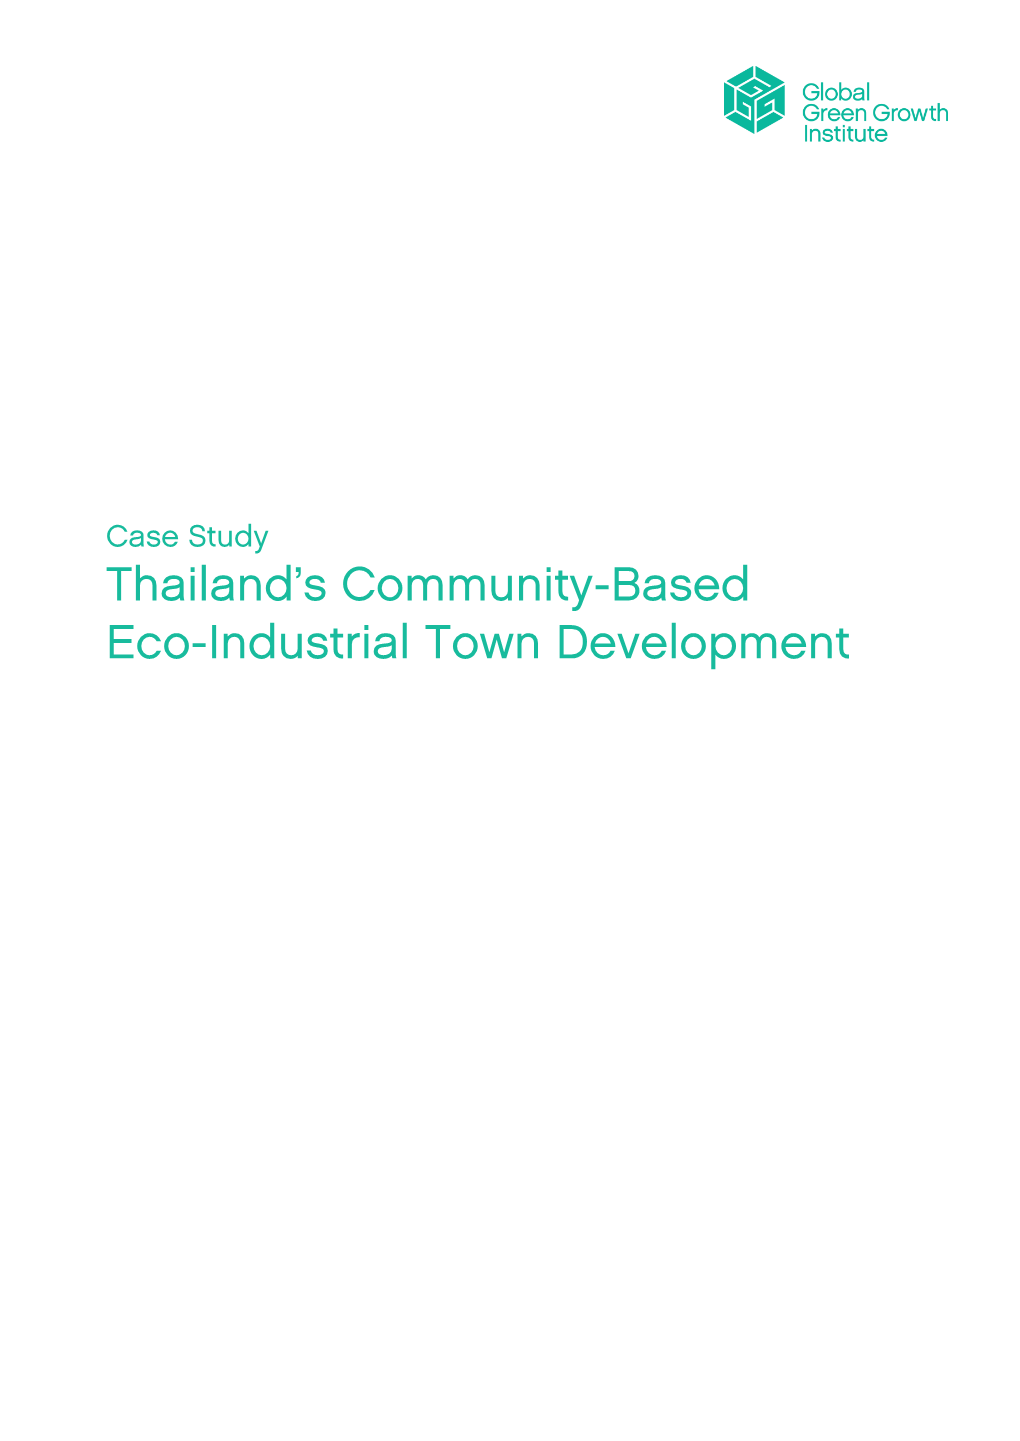 Thailand's Community-Based Eco-Industrial Town Development